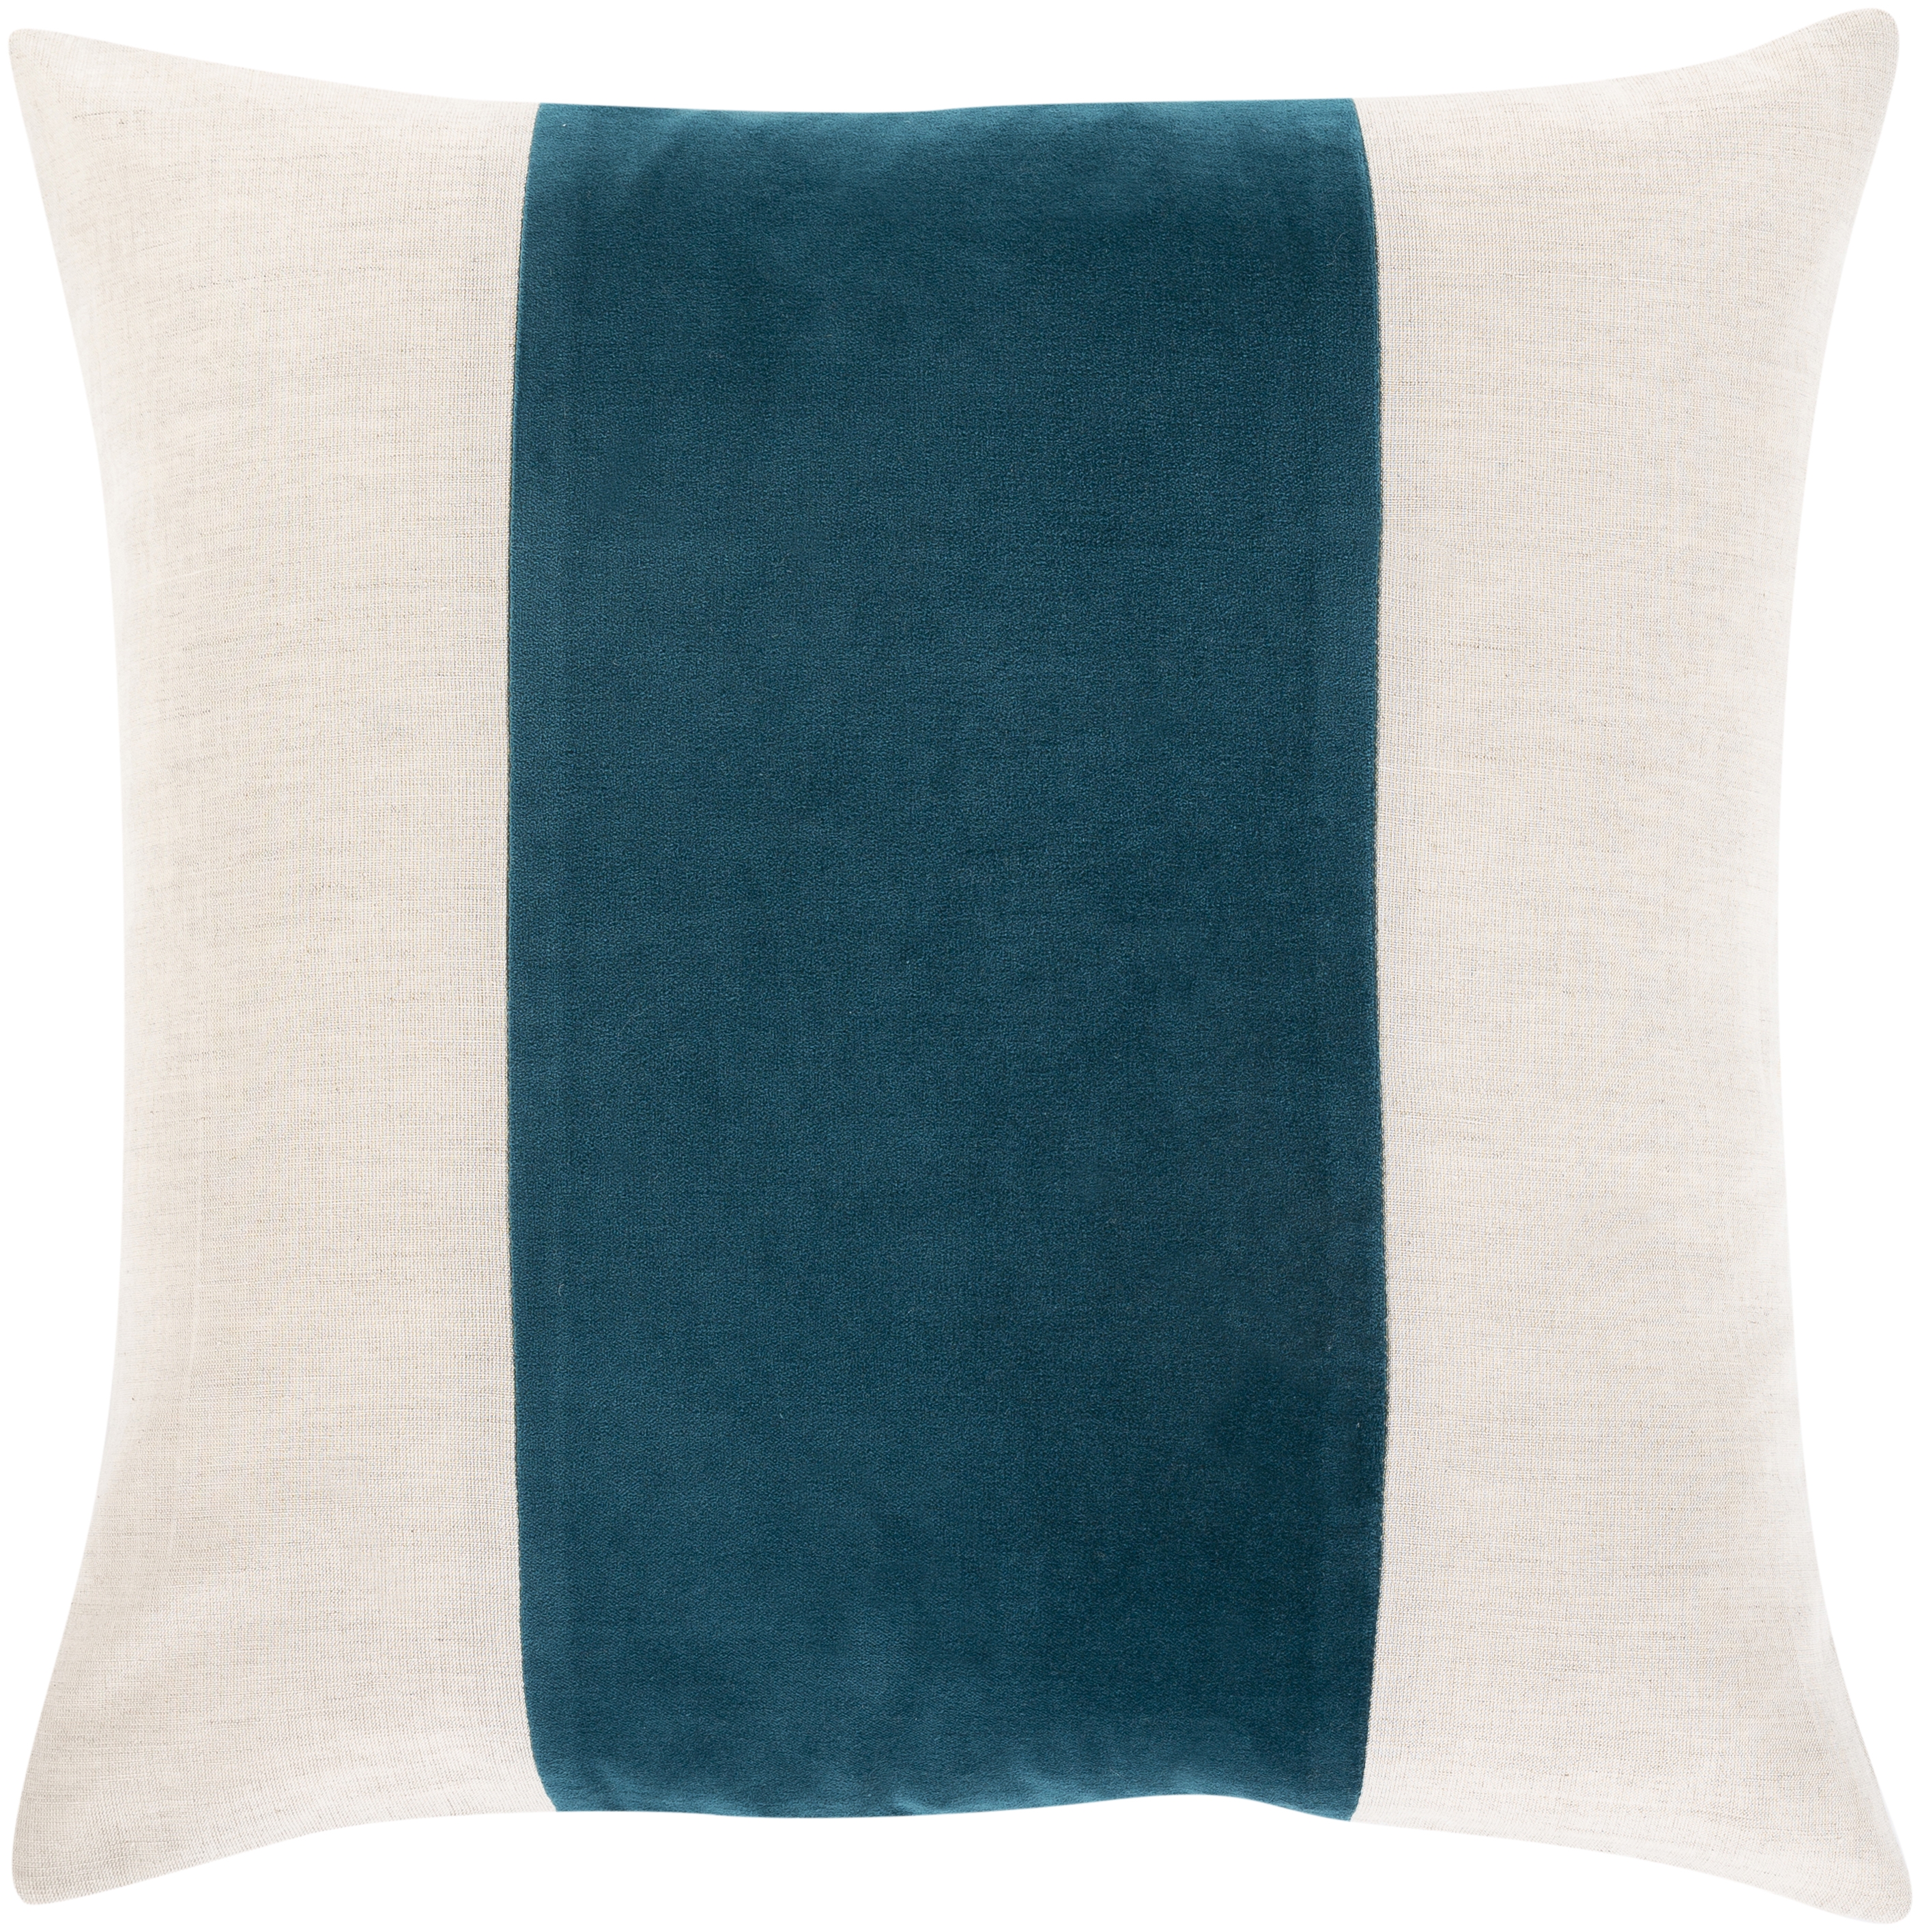 Moza Throw Pillow, 22" x 22", with down insert - Image 0